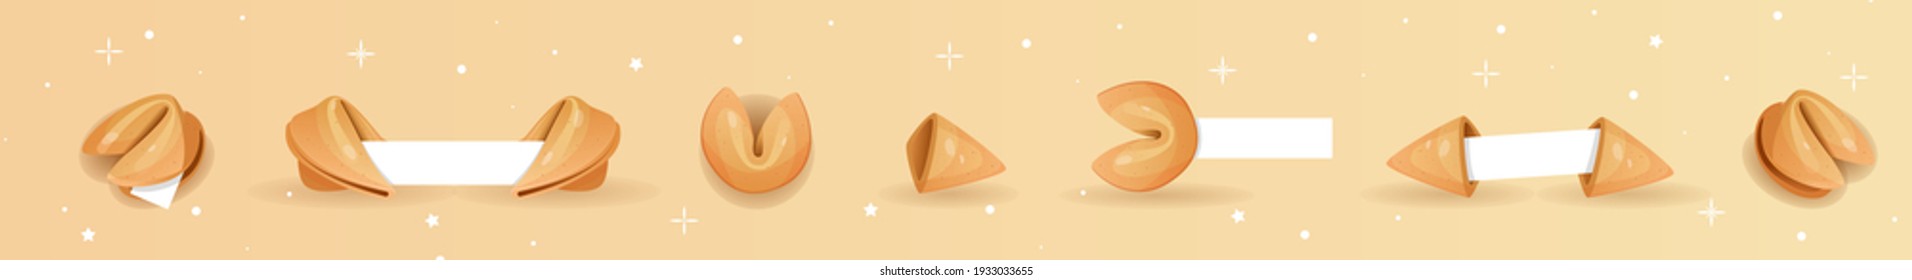 Chinese fortune cookies flat food vector cartoon set on colors background with elements of stars. Fortune cookies with blank paper template. open and closed chinese fortune cookies Vector illustration